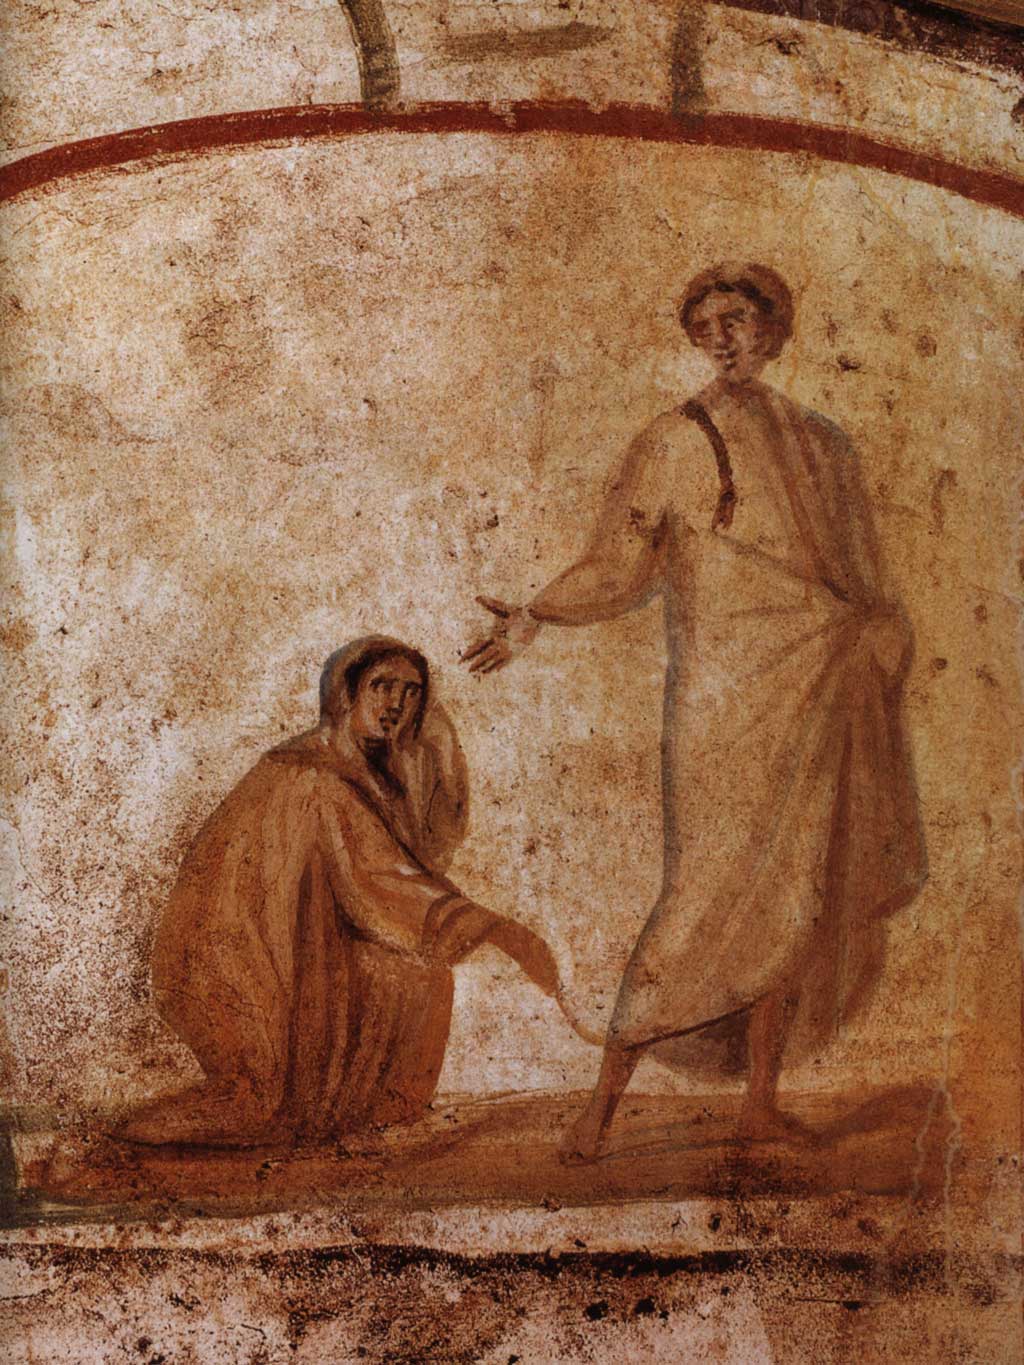 Fresco of a woman reaching for the bottom of Jesus's robe while Jesus turns around to acknowledge her presence.